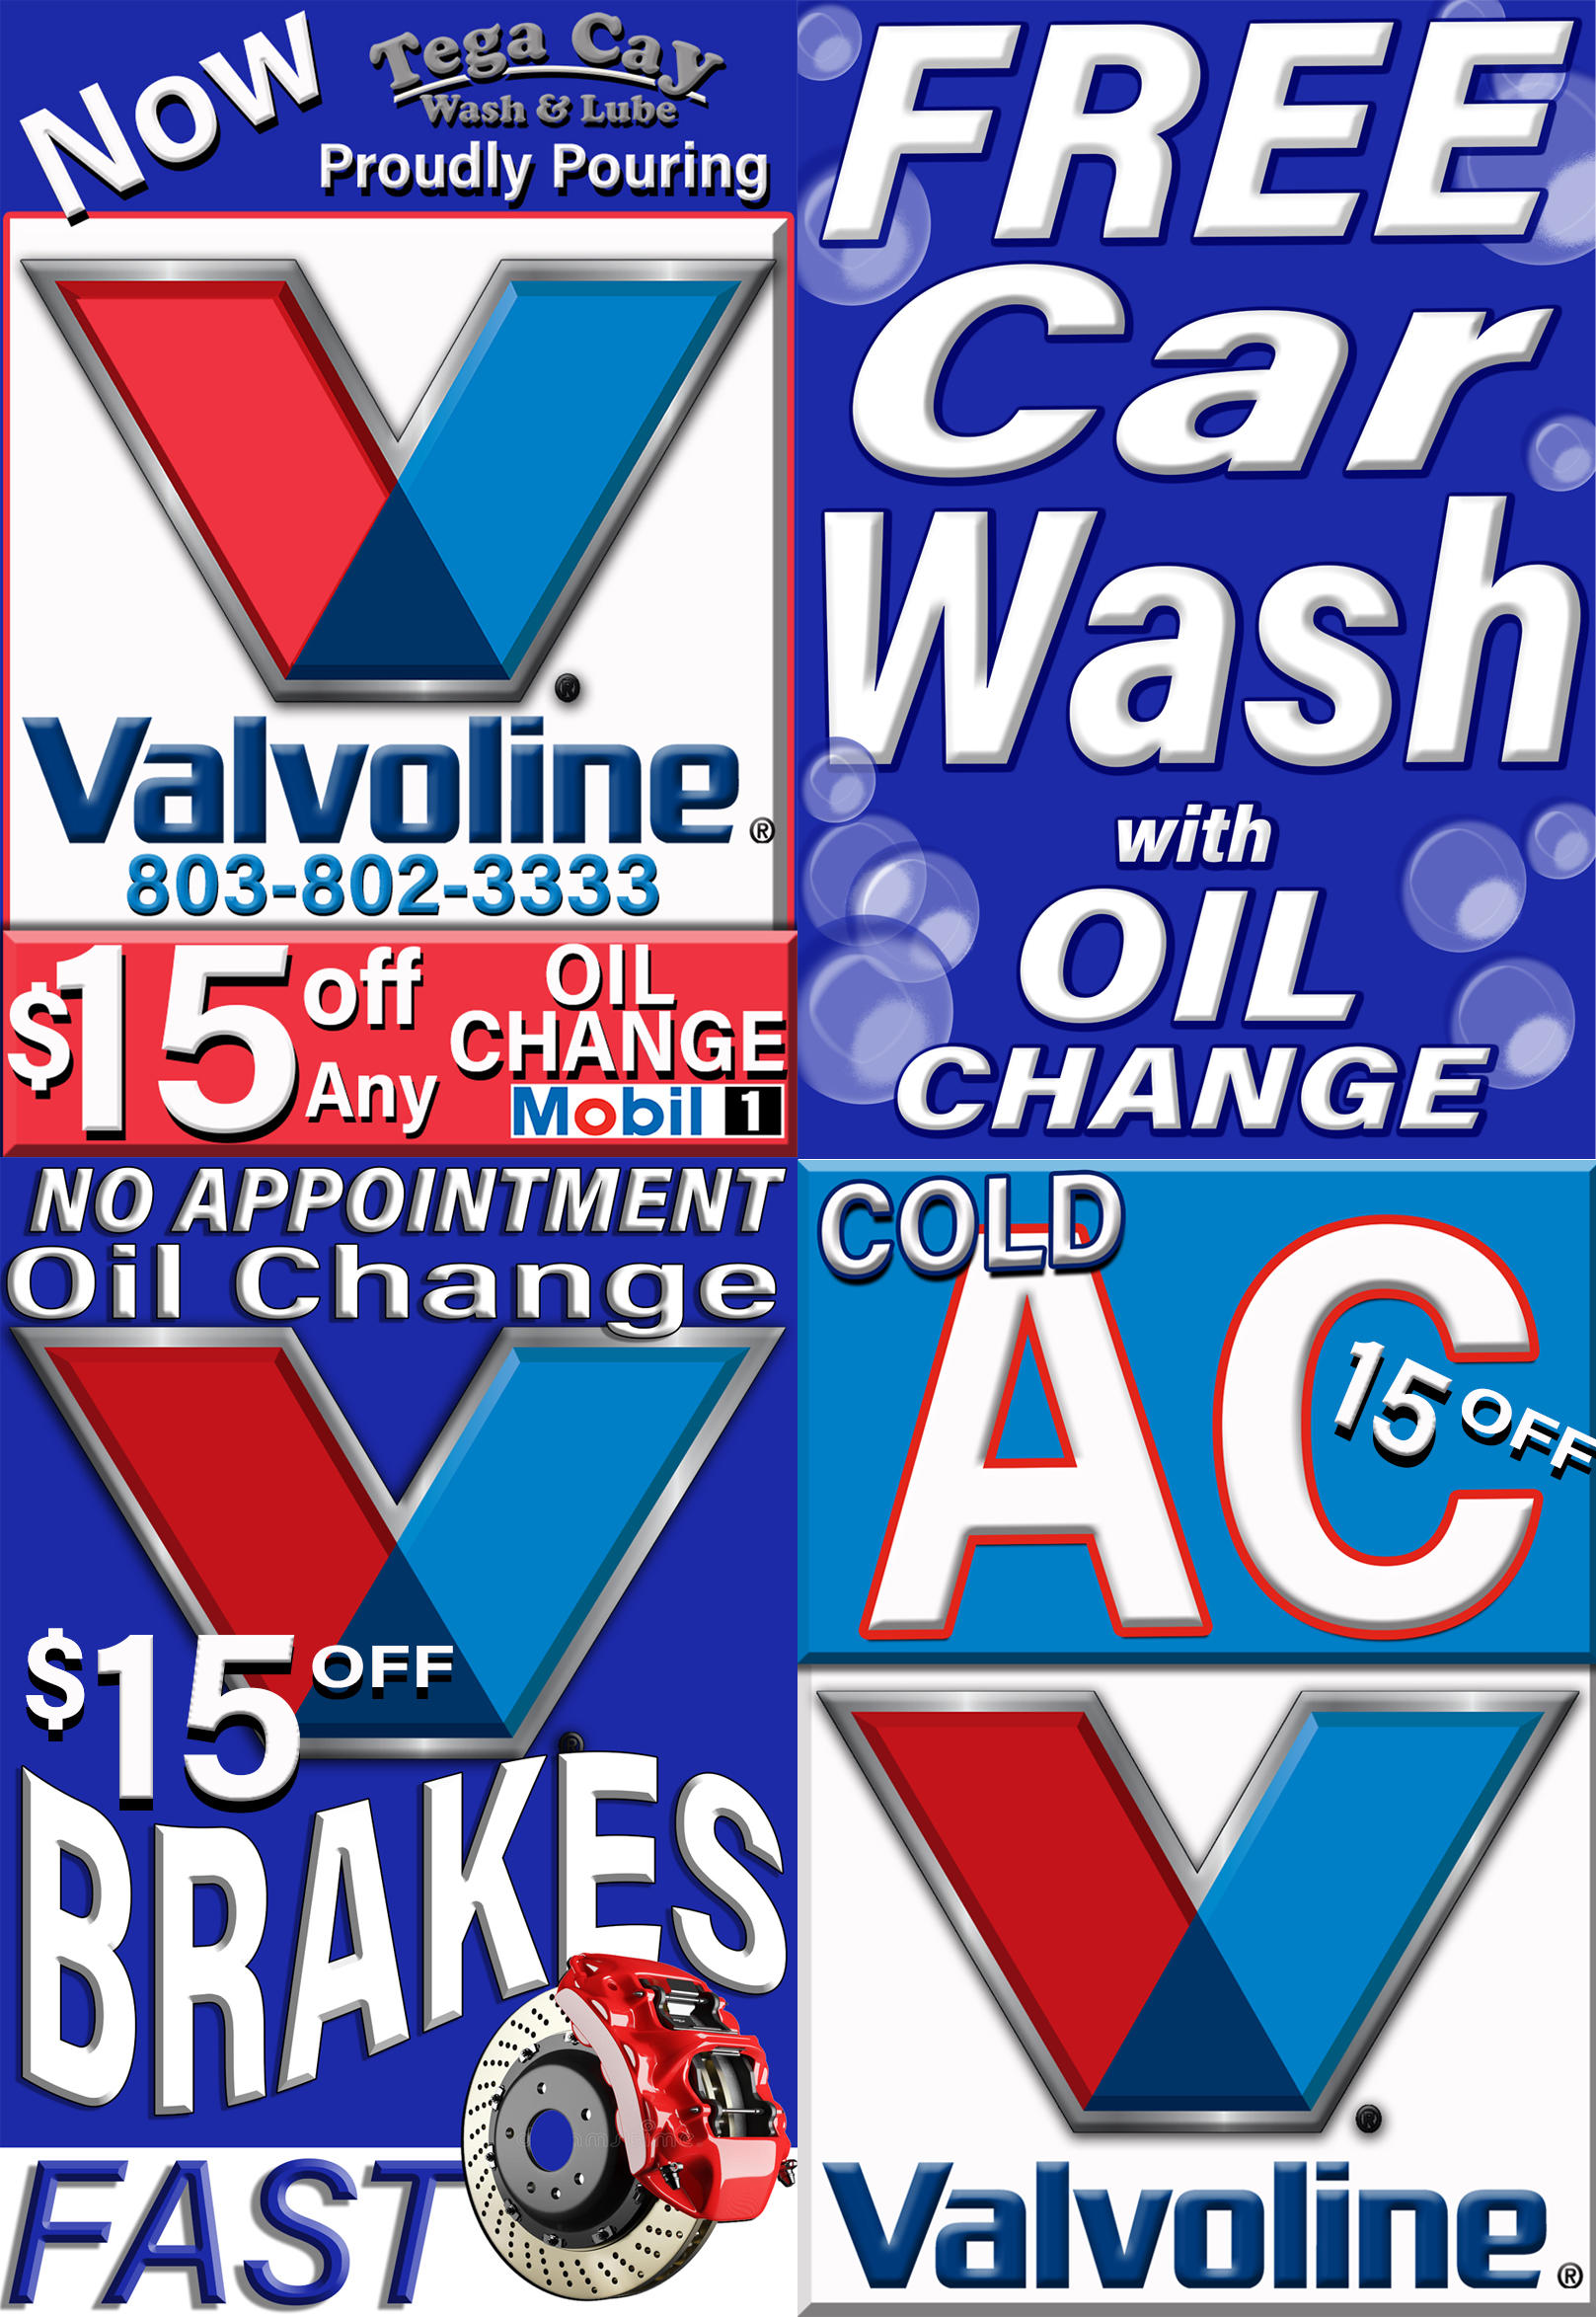 Fort Mill location: Limited-Time Offer: Expires 5-30-23 | Save Big on Valvoline Oil Changes, AC & Brake Repairs!
Don't miss out on exclusive coupons for Valvoline oil changes, AC repairs, brake repairs, and even a complimentary car wash. Located in Fort Mill, SC, dial 803-802-3333 for directions. Enjoy a $15 discount on Valvoline oil changes, Mobil 1, AC, and brake repairs. Act now and claim your coupon at [shortened URL]. Take advantage of these incredible savings while they last